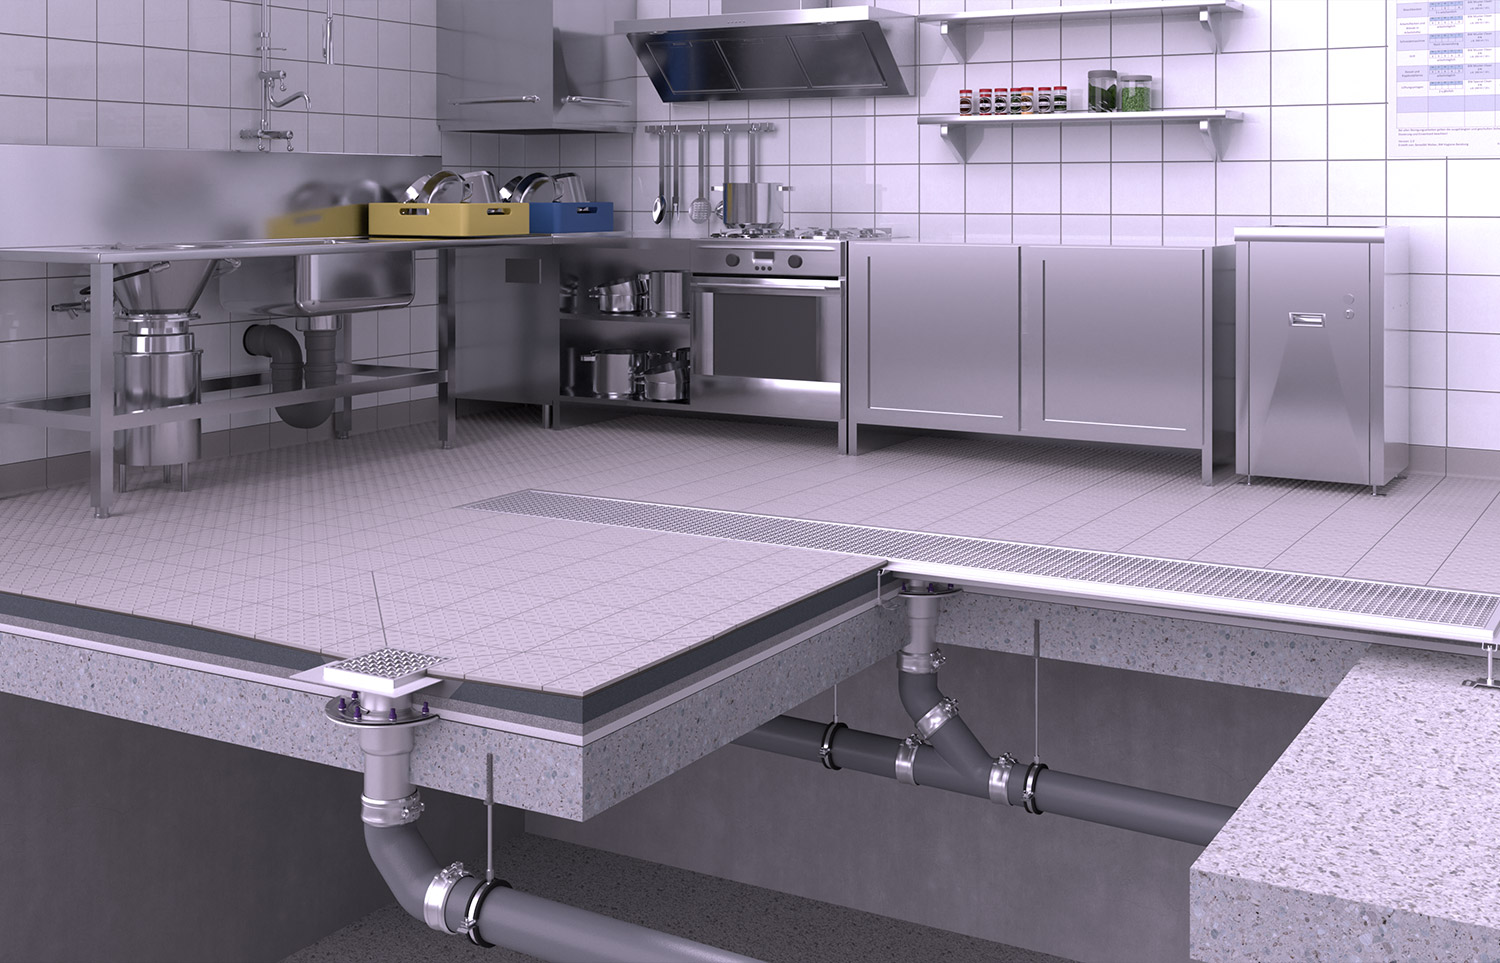 Drainage technology for commercial kitchens - KESSEL - Leading in drainage